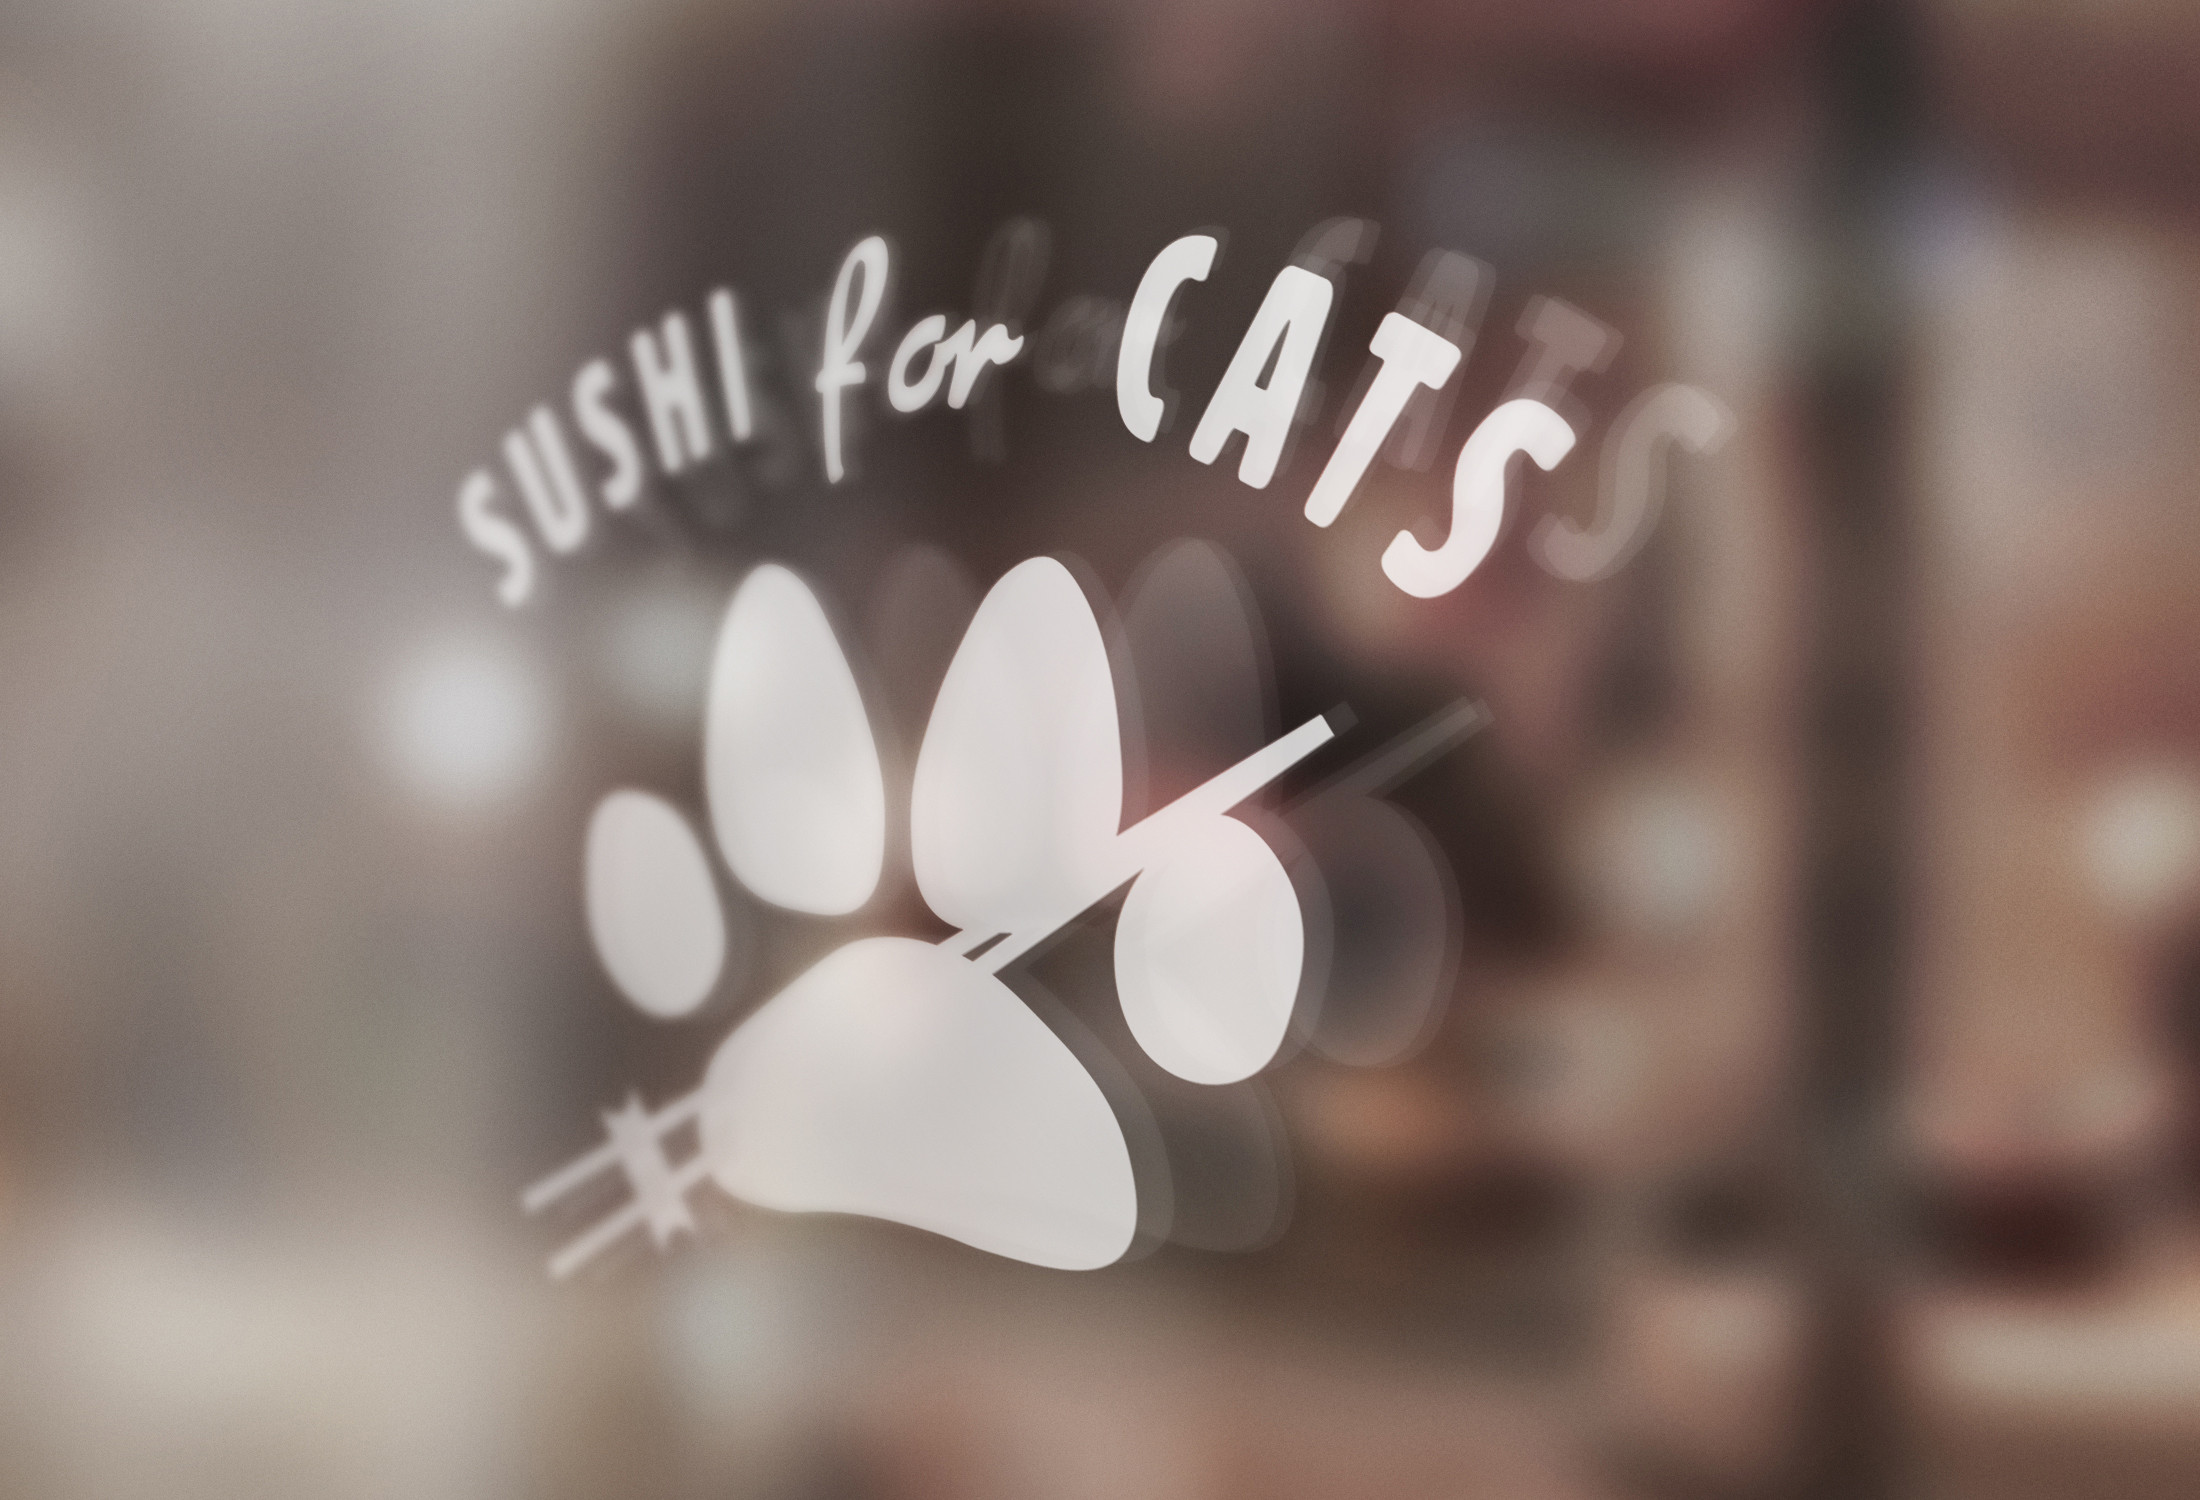 Sushi for cats logo on a mockup from Graphicburger.com